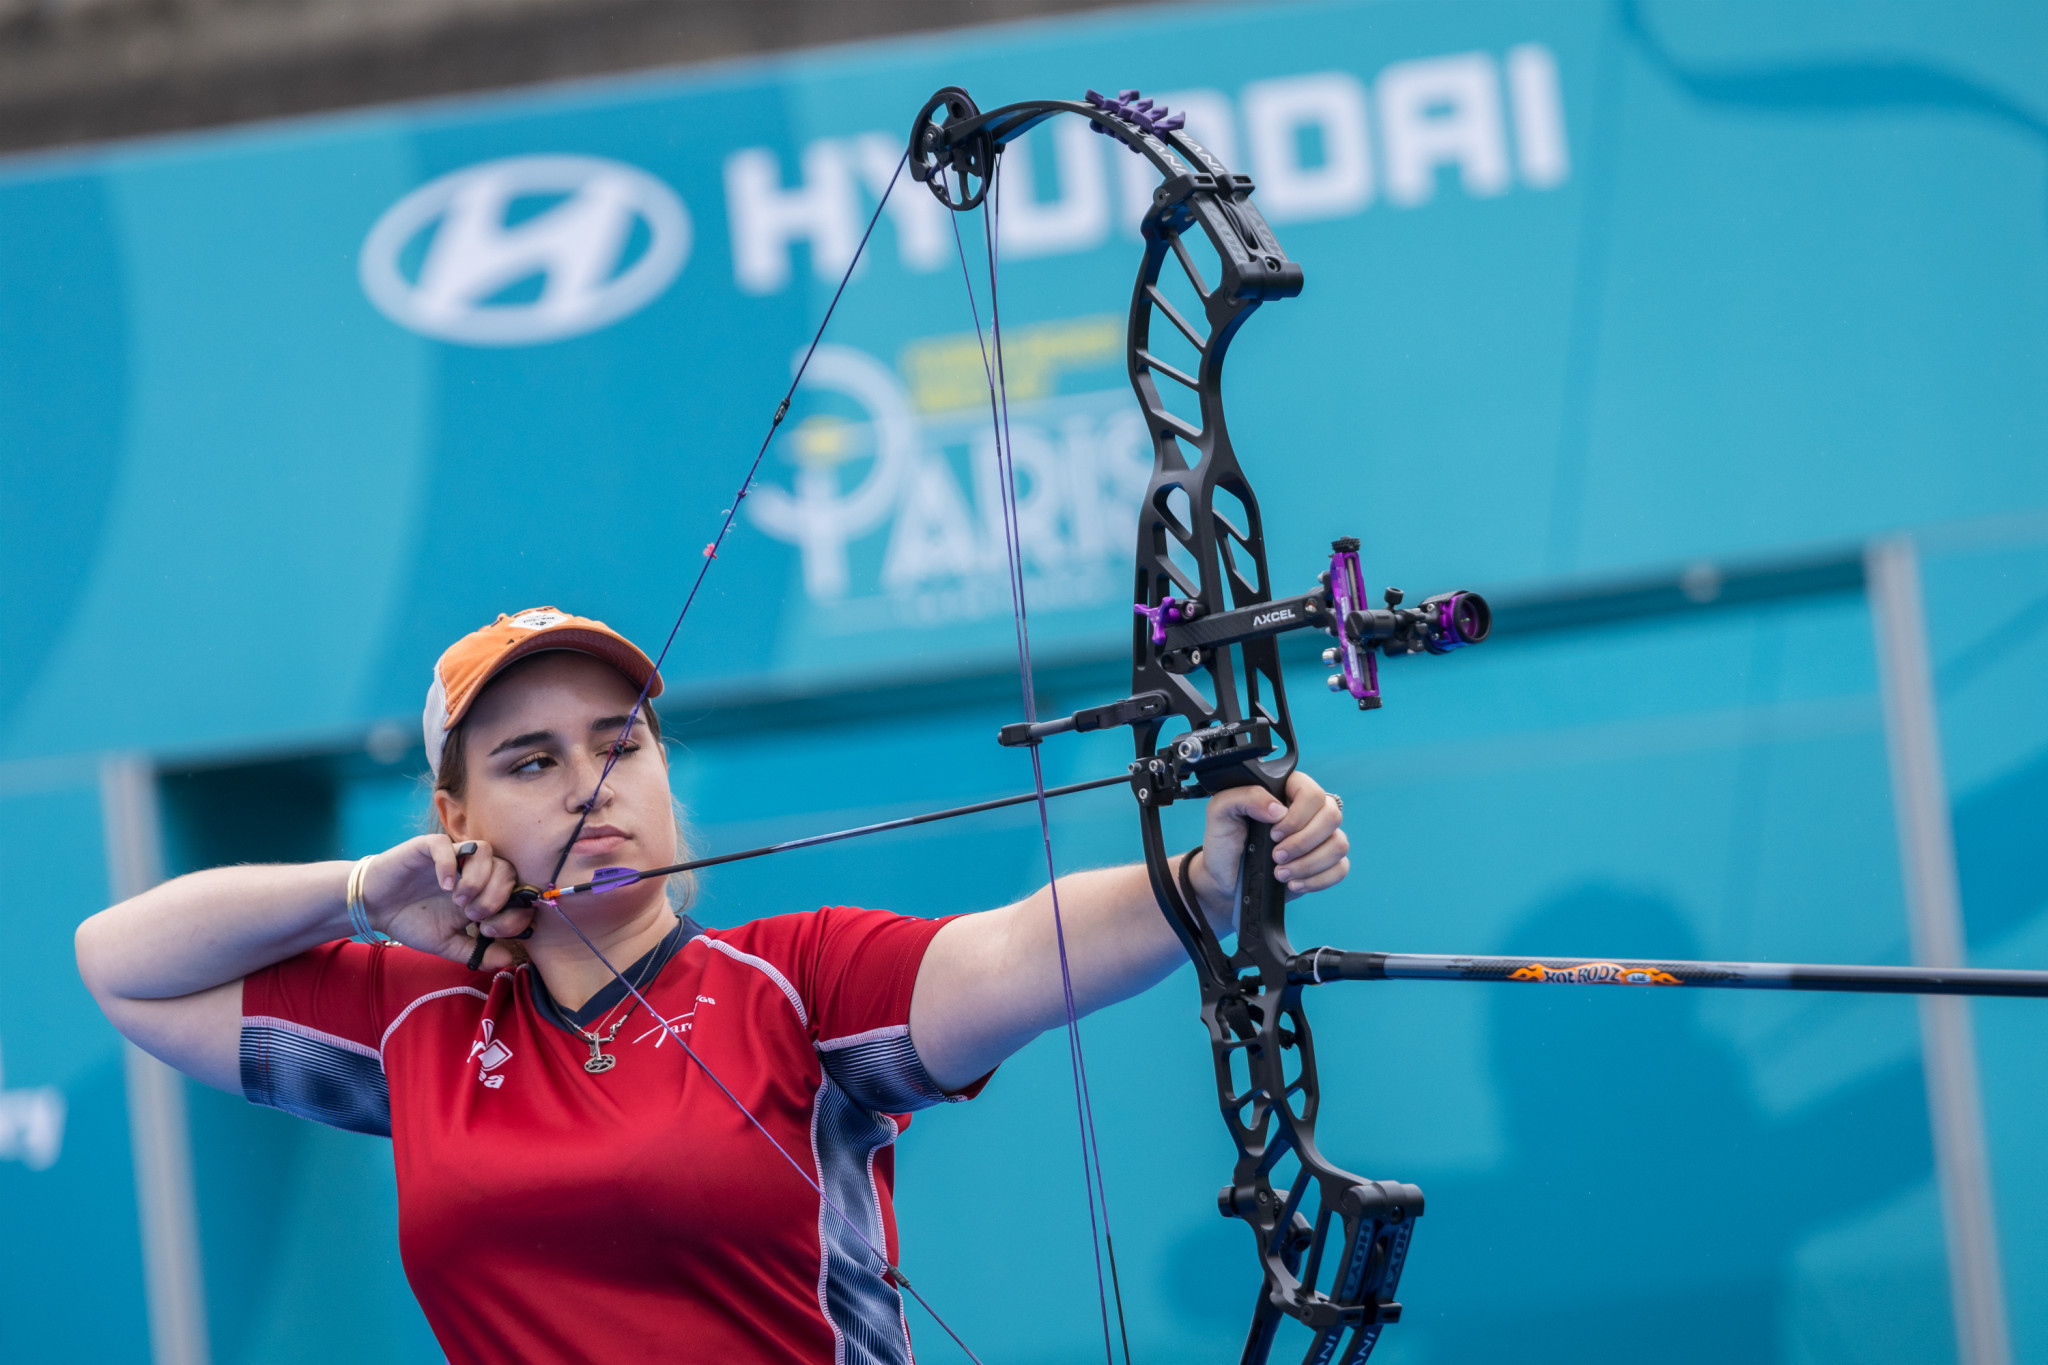 Gibson and Girard seal individual victories at Archery World Cup in Paris